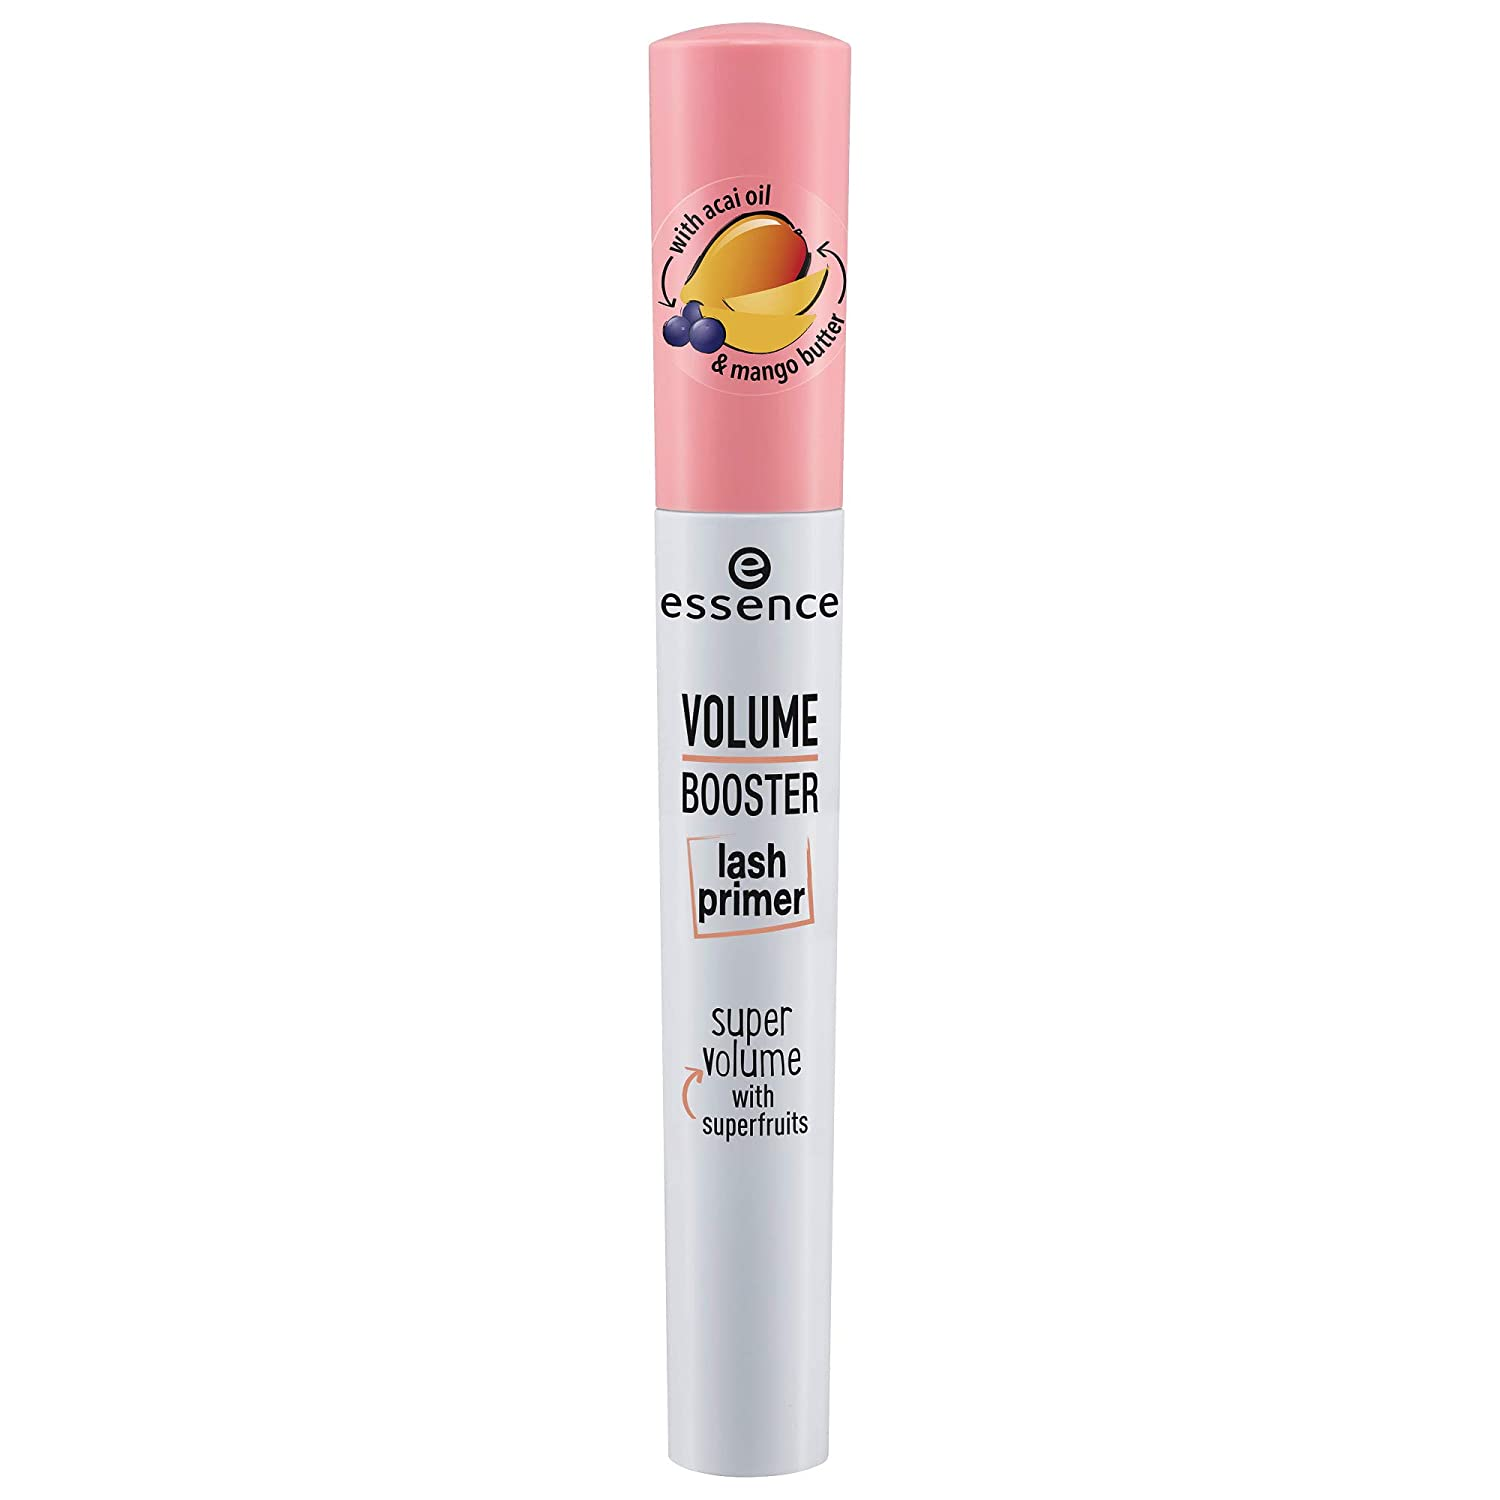 The essence volume booster lash primer is the perfect partner to your favorite mascara. This mascara primers is infused with acai oil and mango butter for nutured & conditioned lashes. Use this primer not only to achieve volume, but to create a moisturizing shield around each lash so your mascara clings to the formula, leaving your lashes beneath protected from damage. 